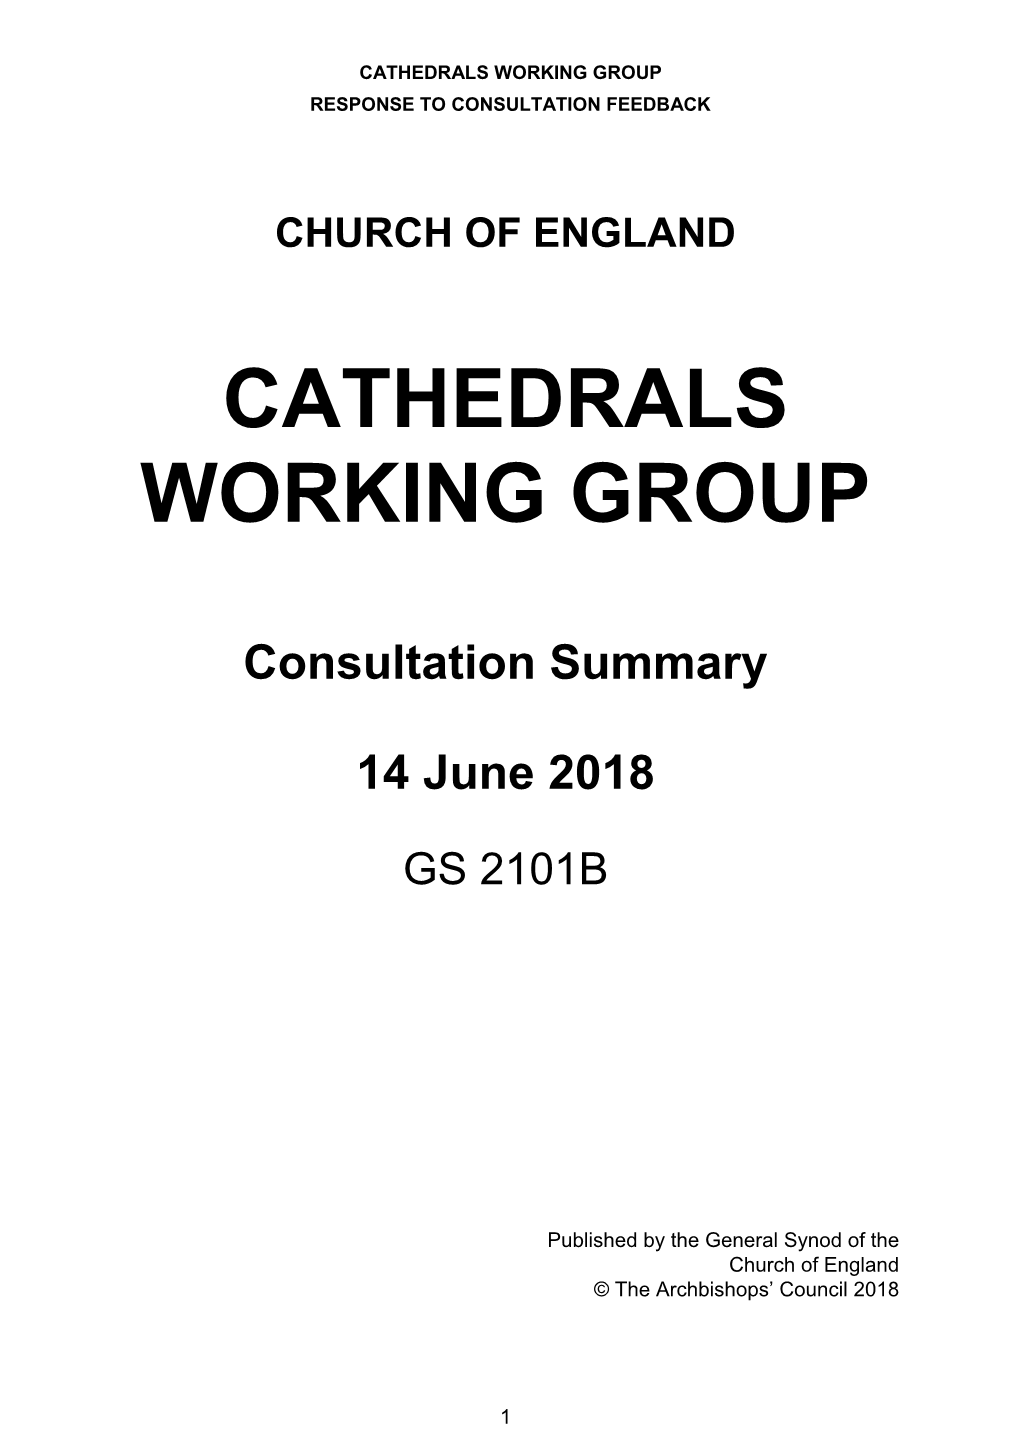 Cathedrals Working Group Response to Consultation Feedback